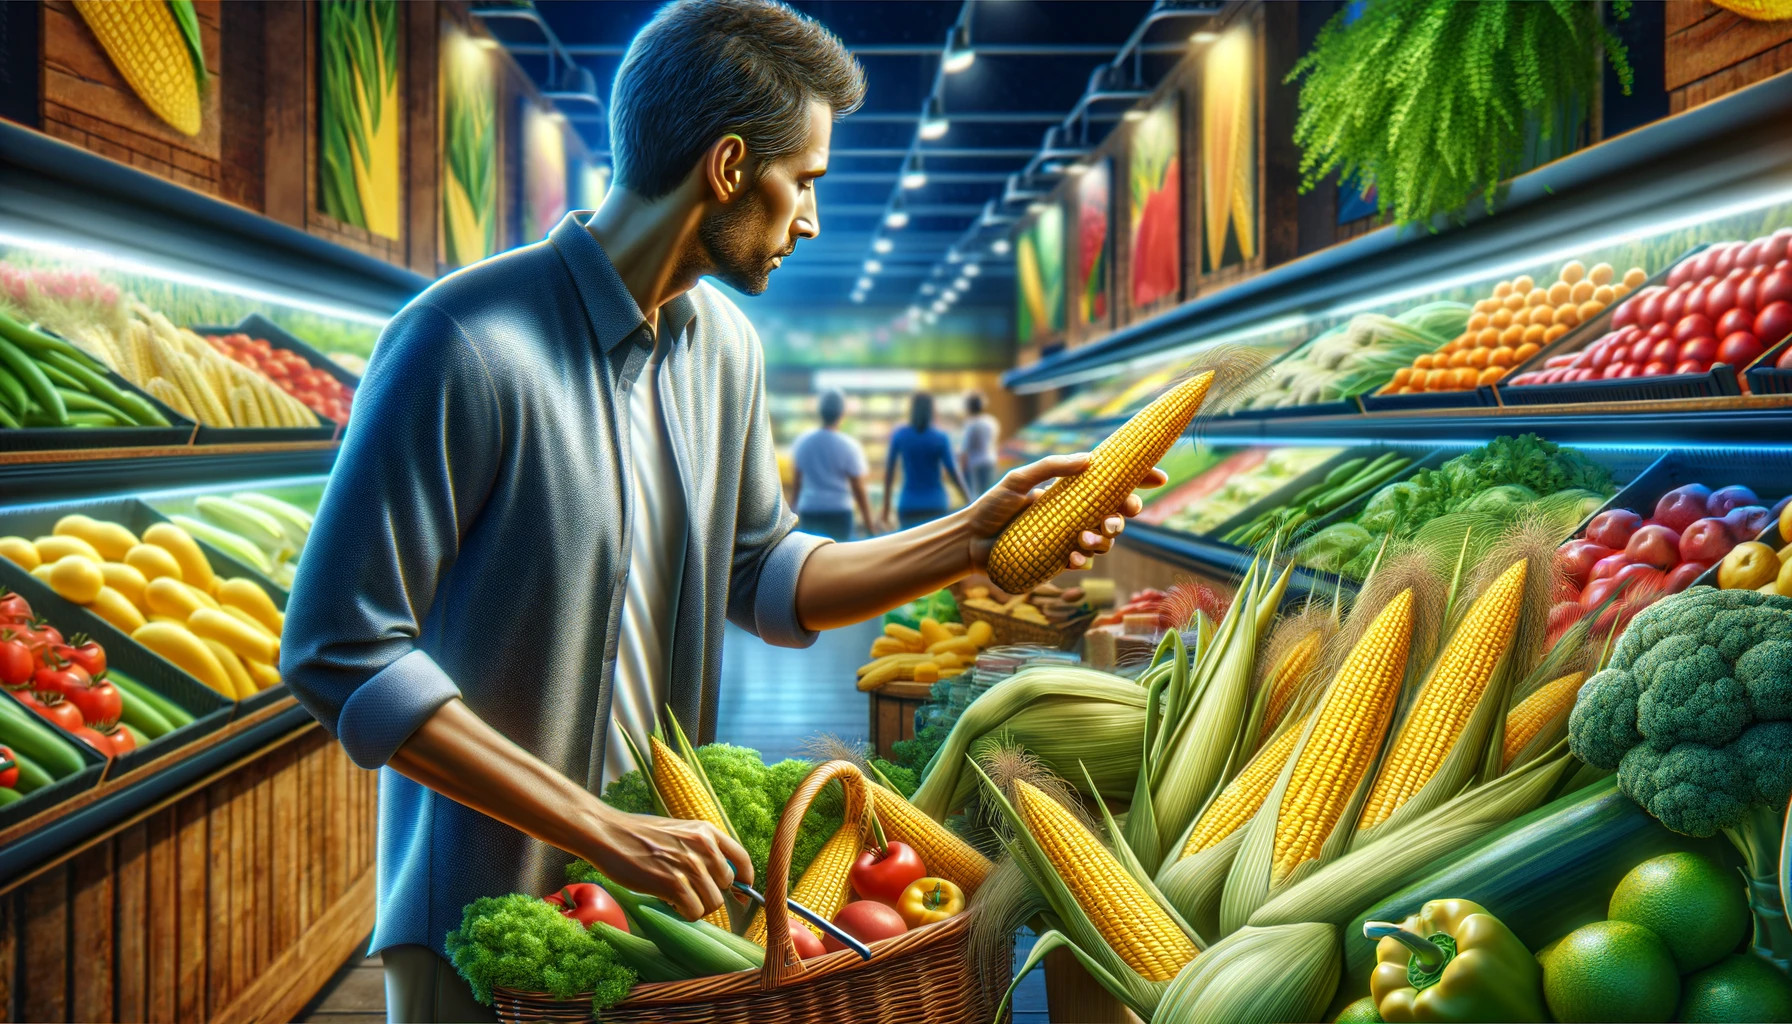 Picking out corn from grocery store